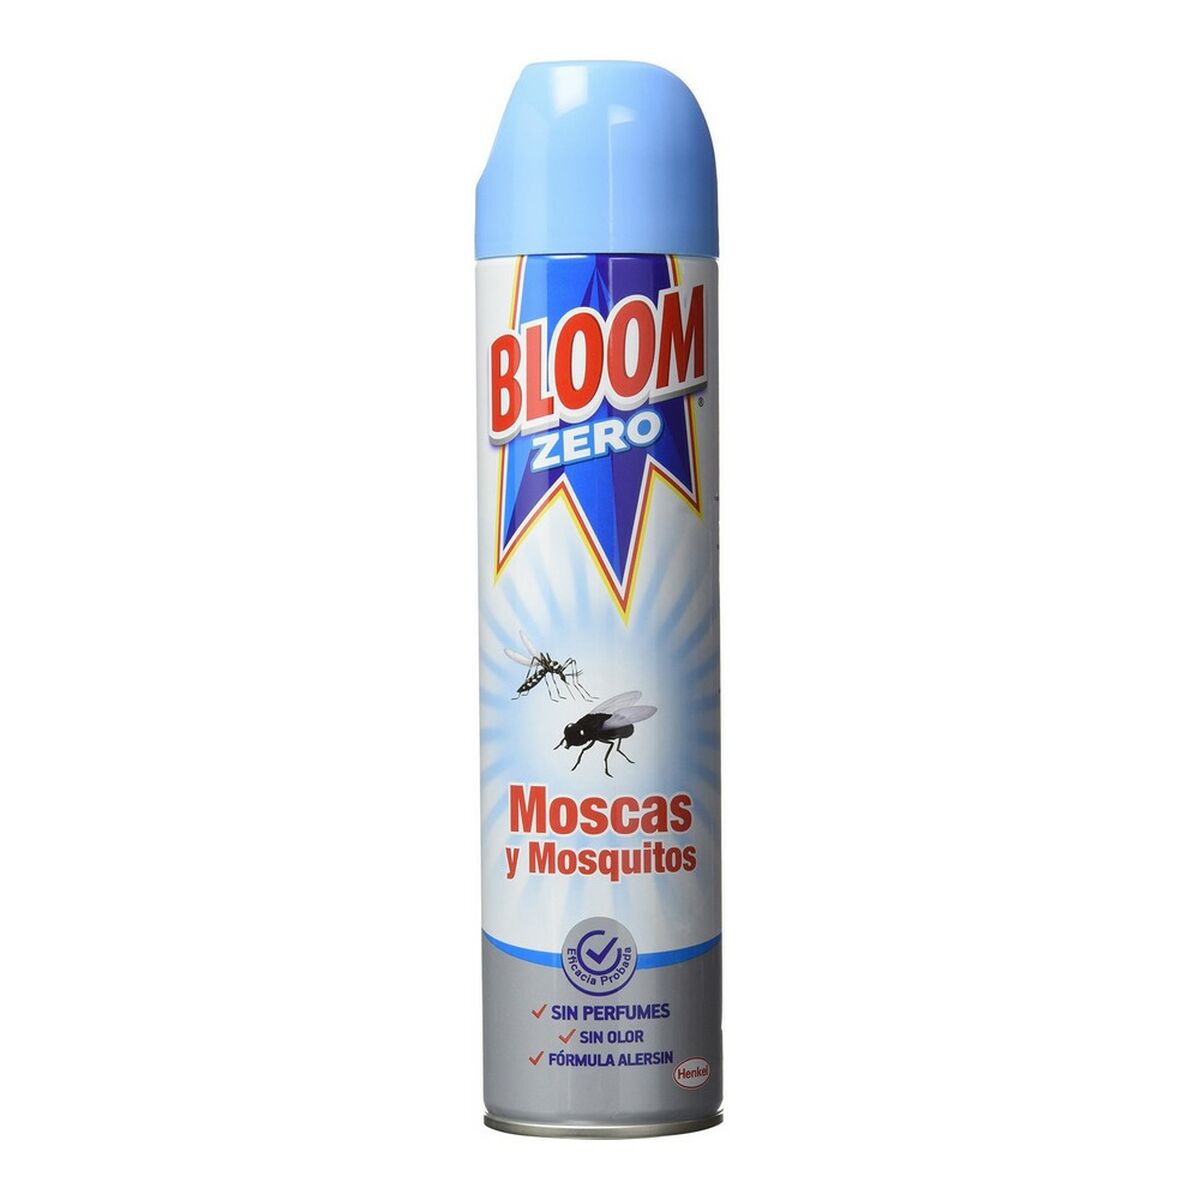 Insecticde Bloom Odourless (400 ml)